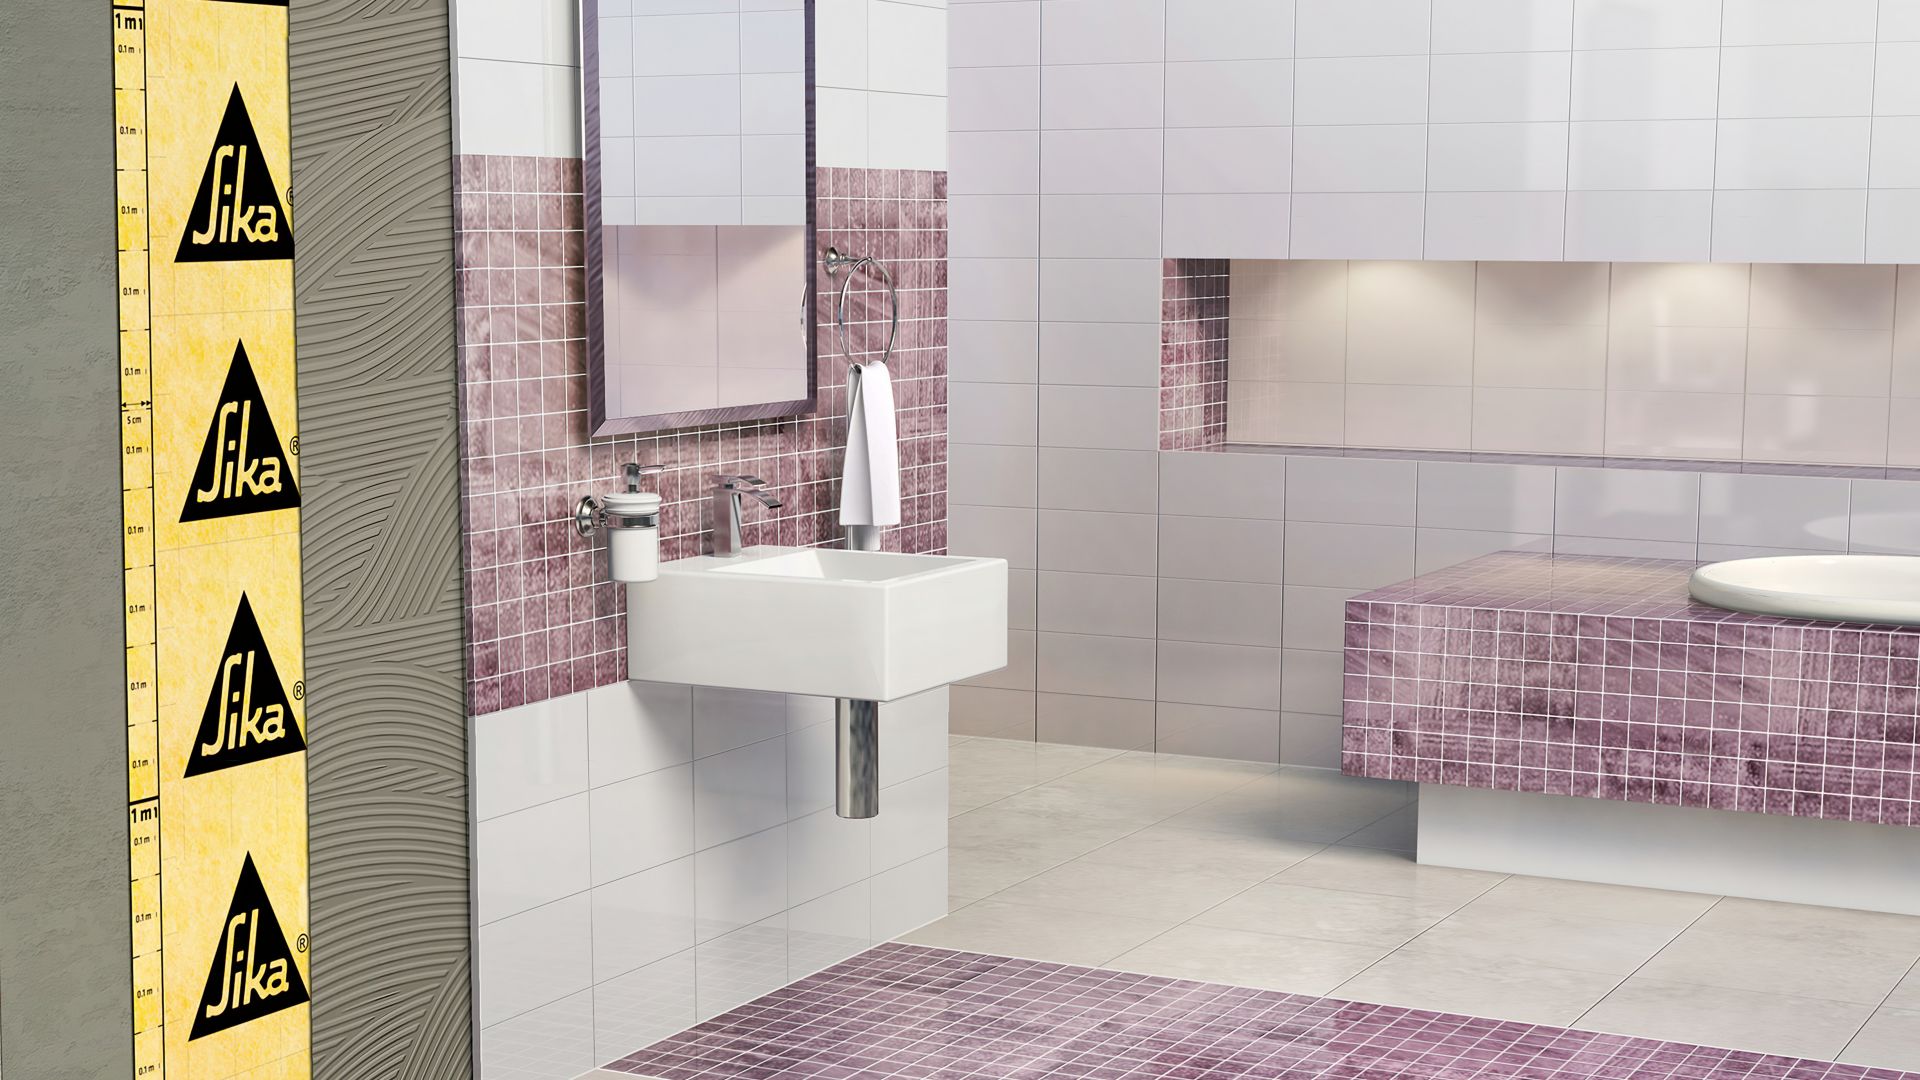 Illustration of tile setting adhesives and tiles in bathroom